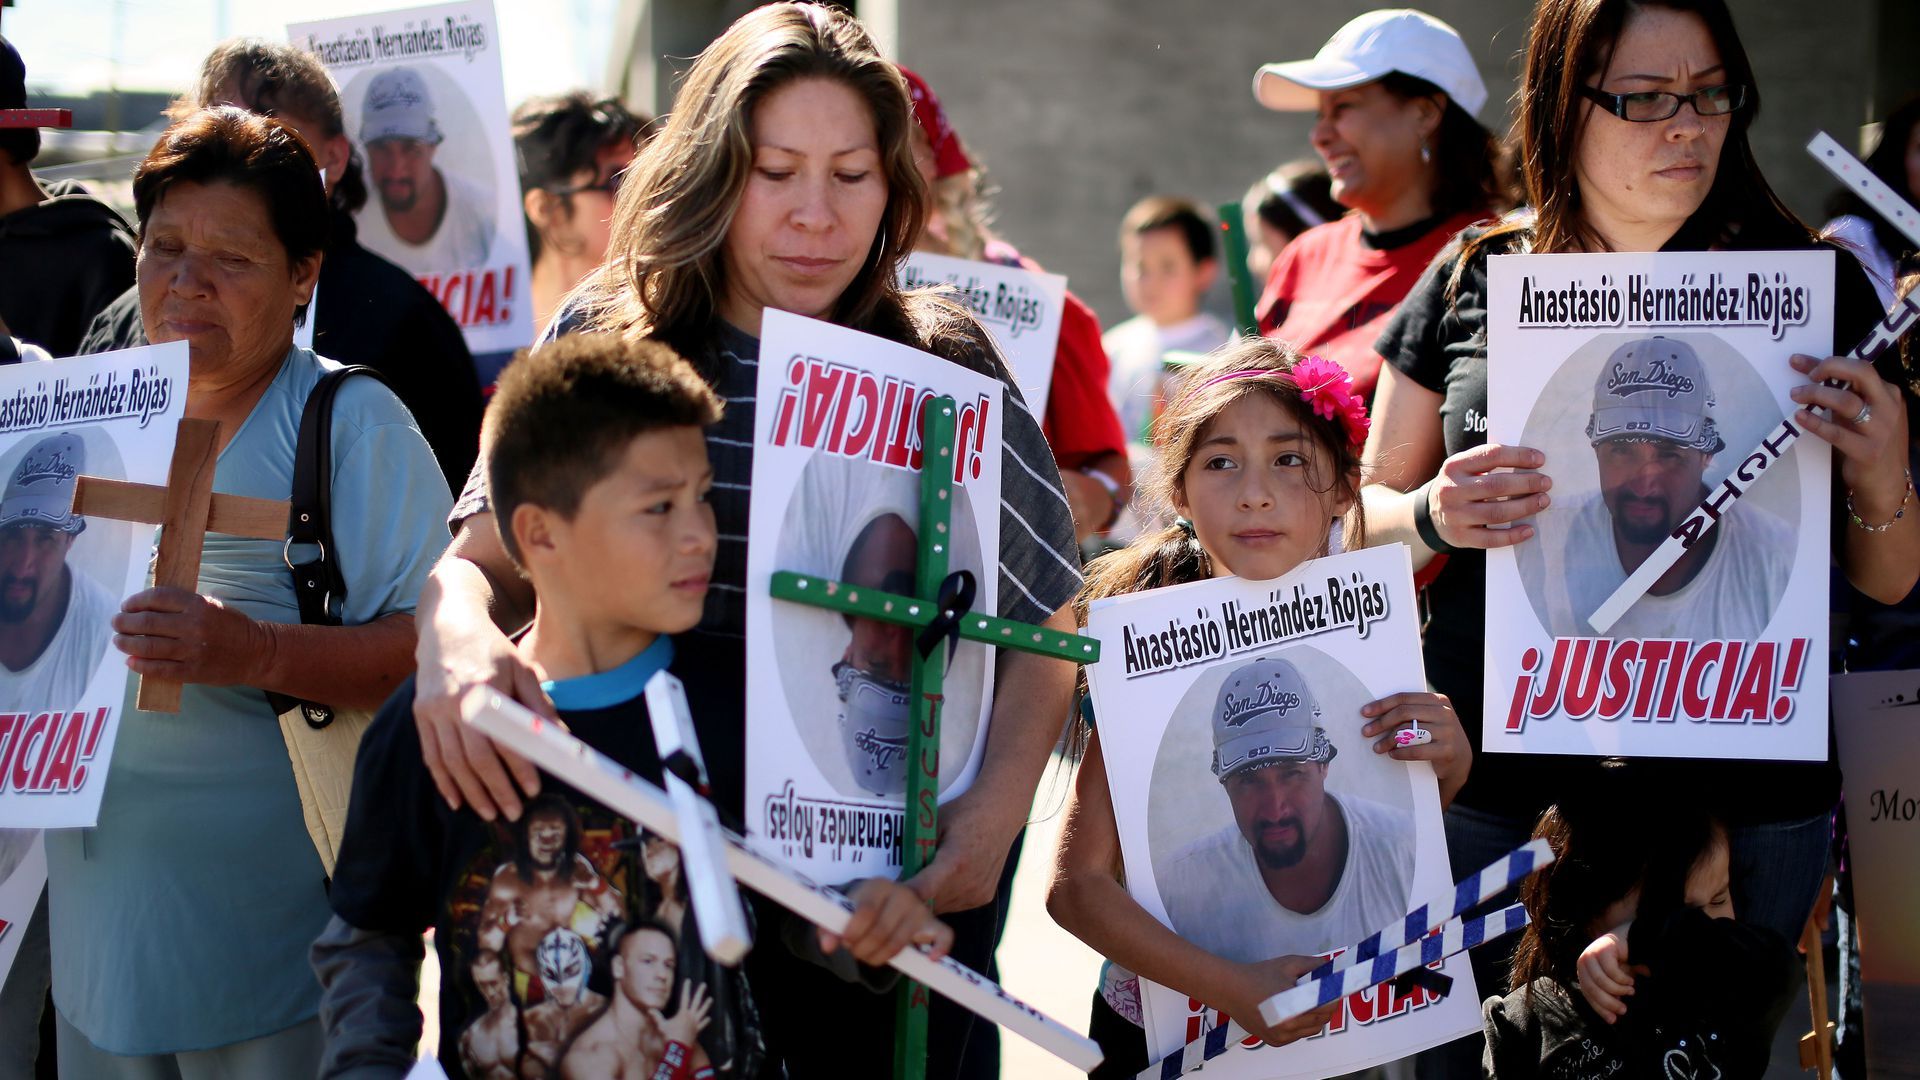 A protest demanding justice over the death of Anastasio Hernández, killed in 2010 during a Border Patrol operation to deport him.